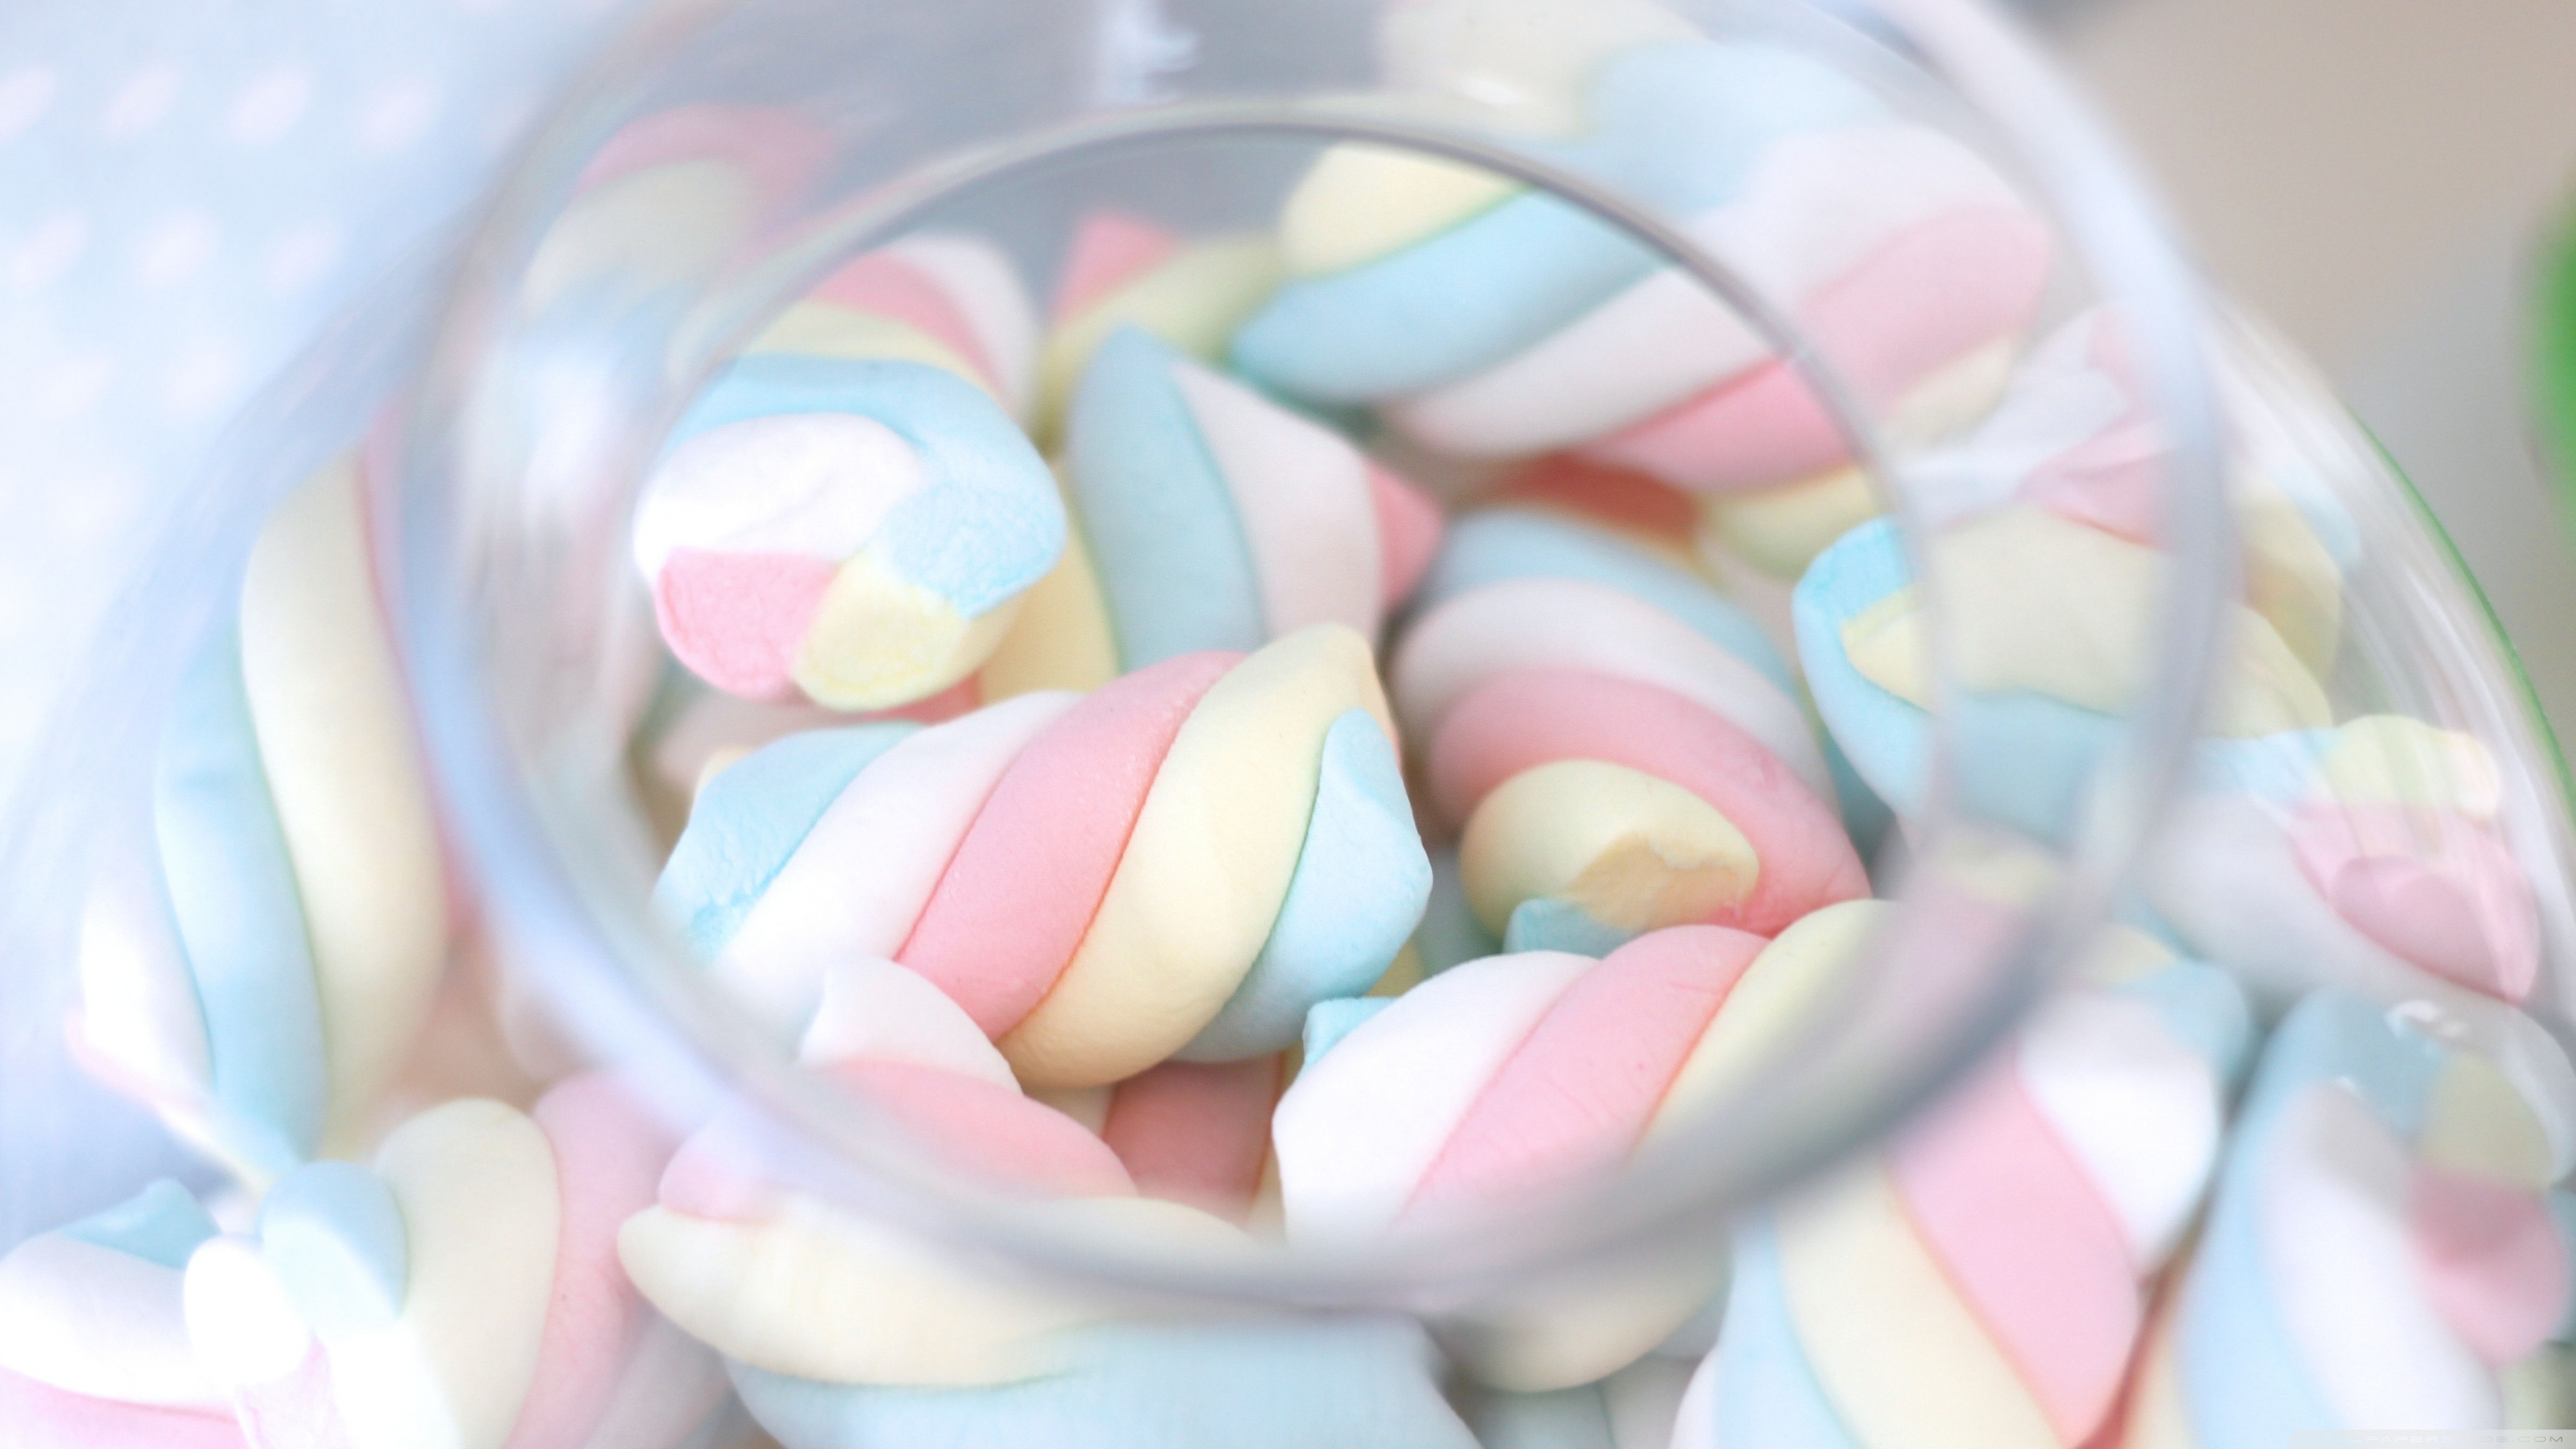 Marshmallow: Confection, molded into shapes and coated with corn starch. 3560x2000 HD Wallpaper.